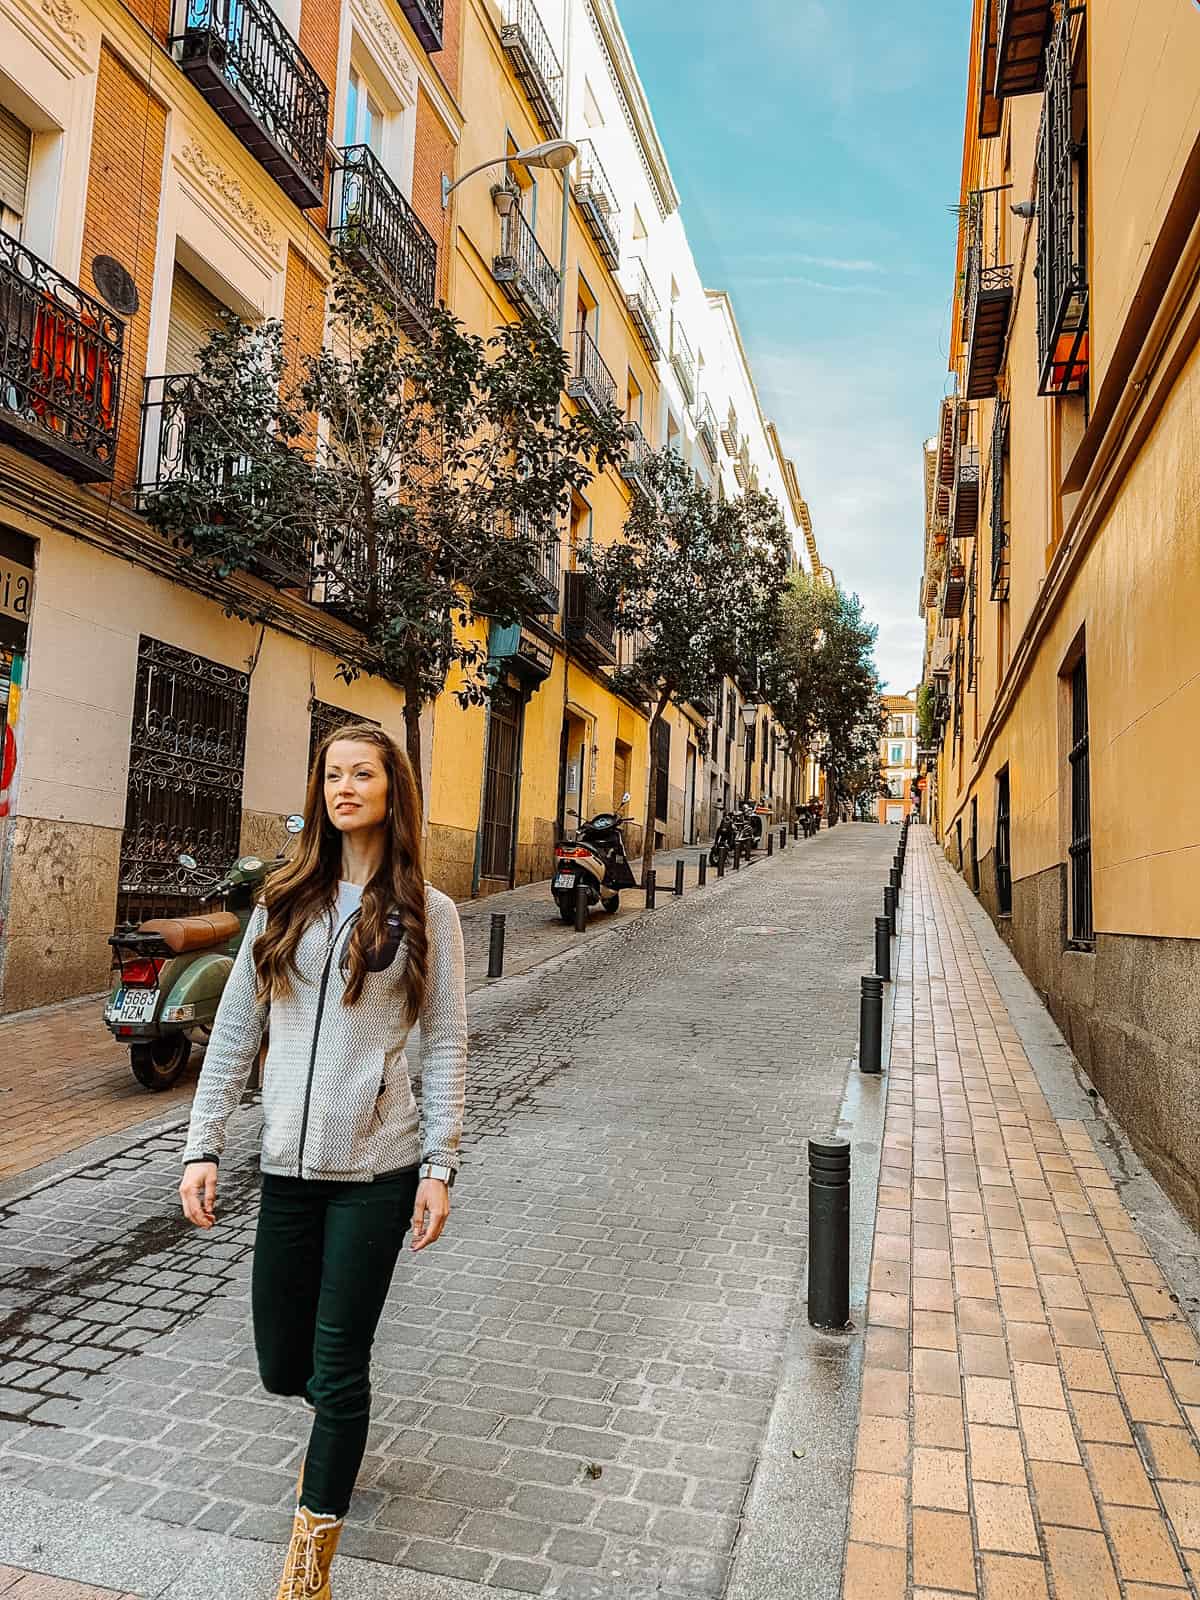 A woman walks down a cobblestone street in Madrid with yellow buildings